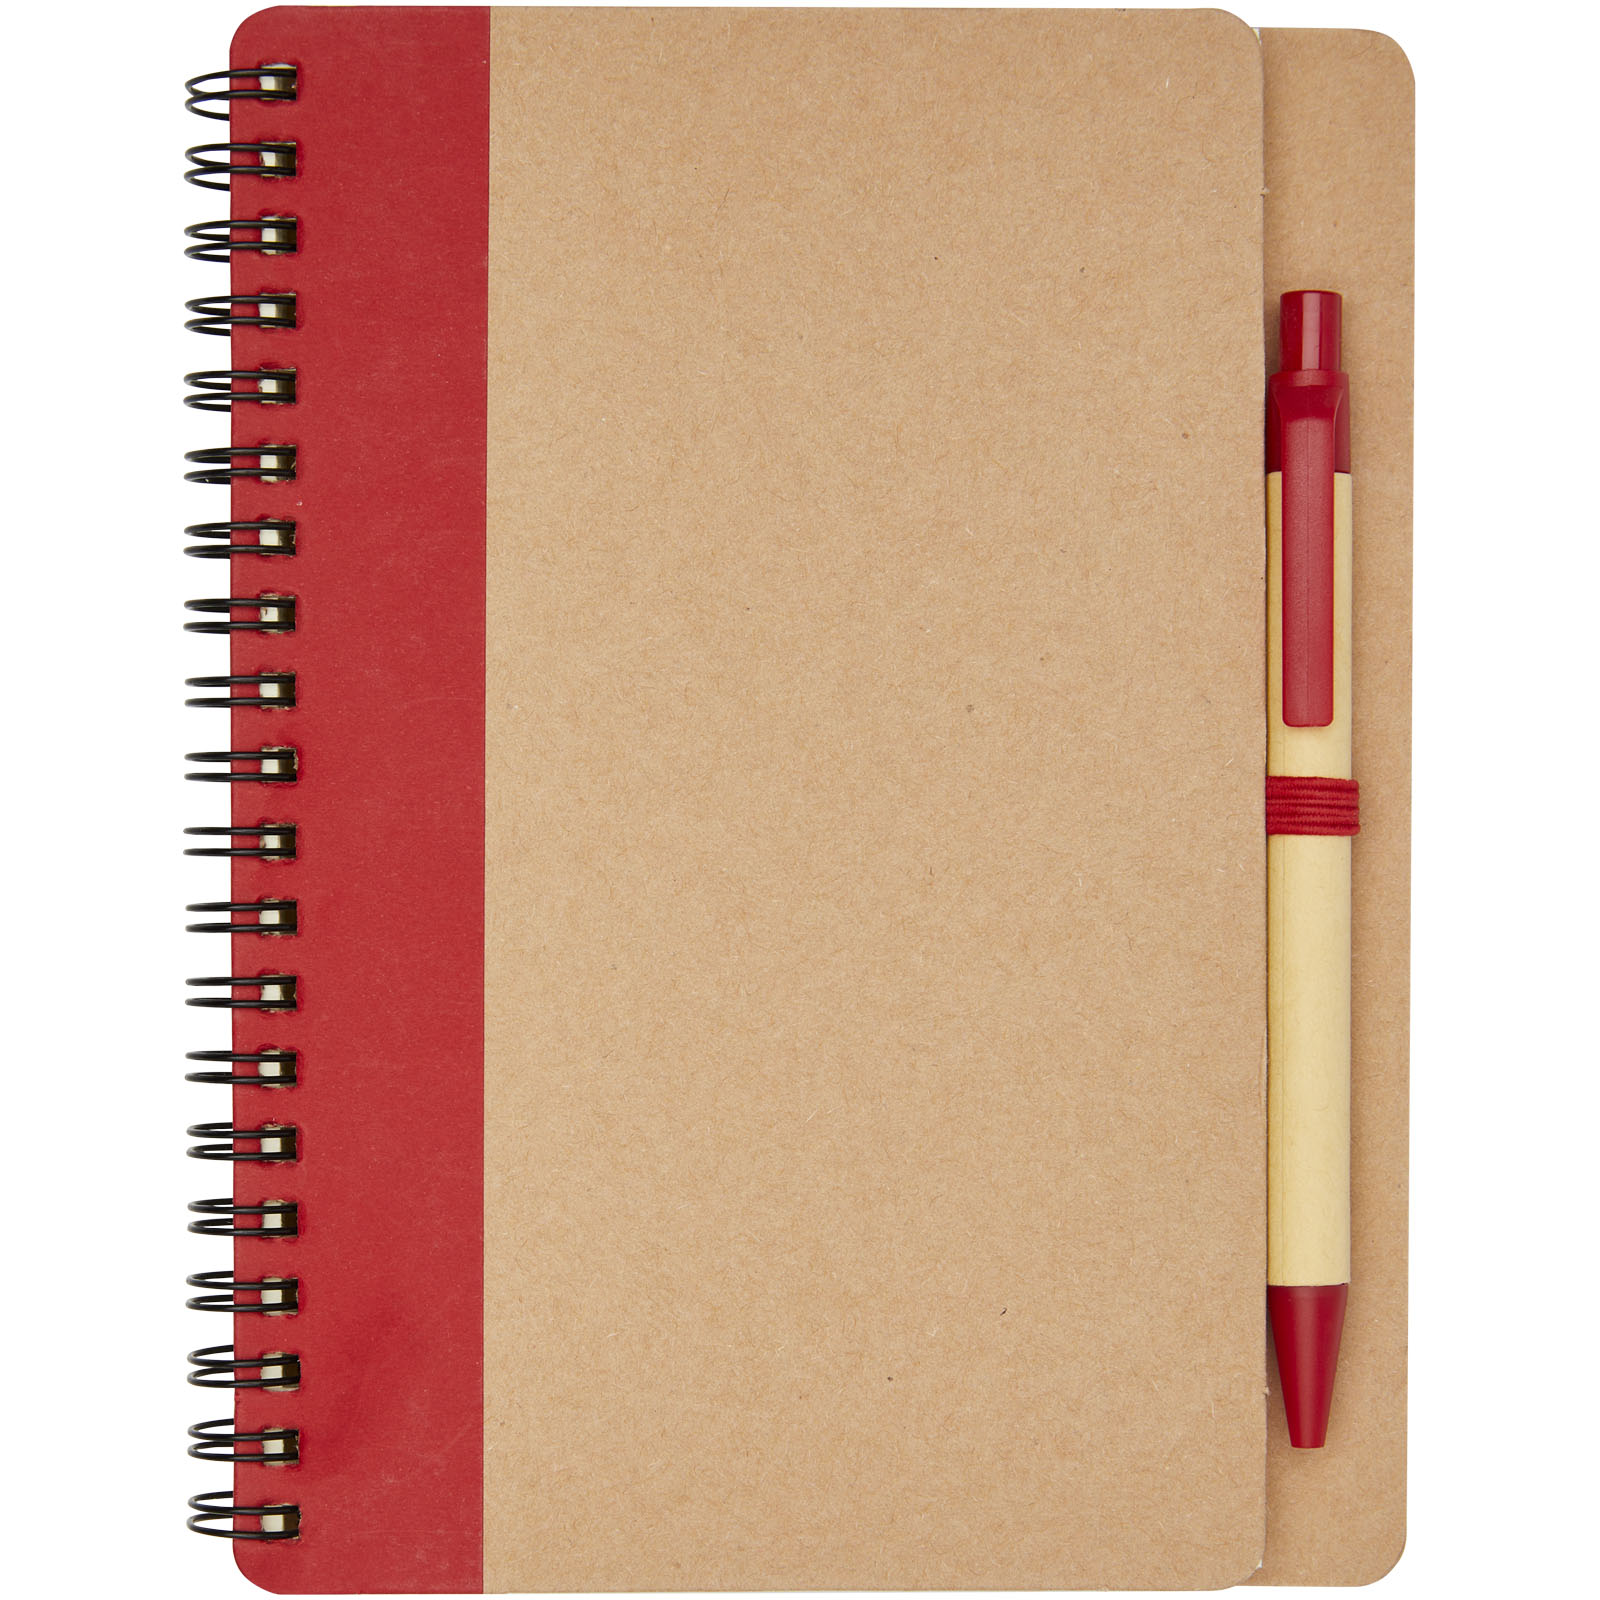 Advertising Hard cover notebooks - Priestly recycled notebook with pen - 1